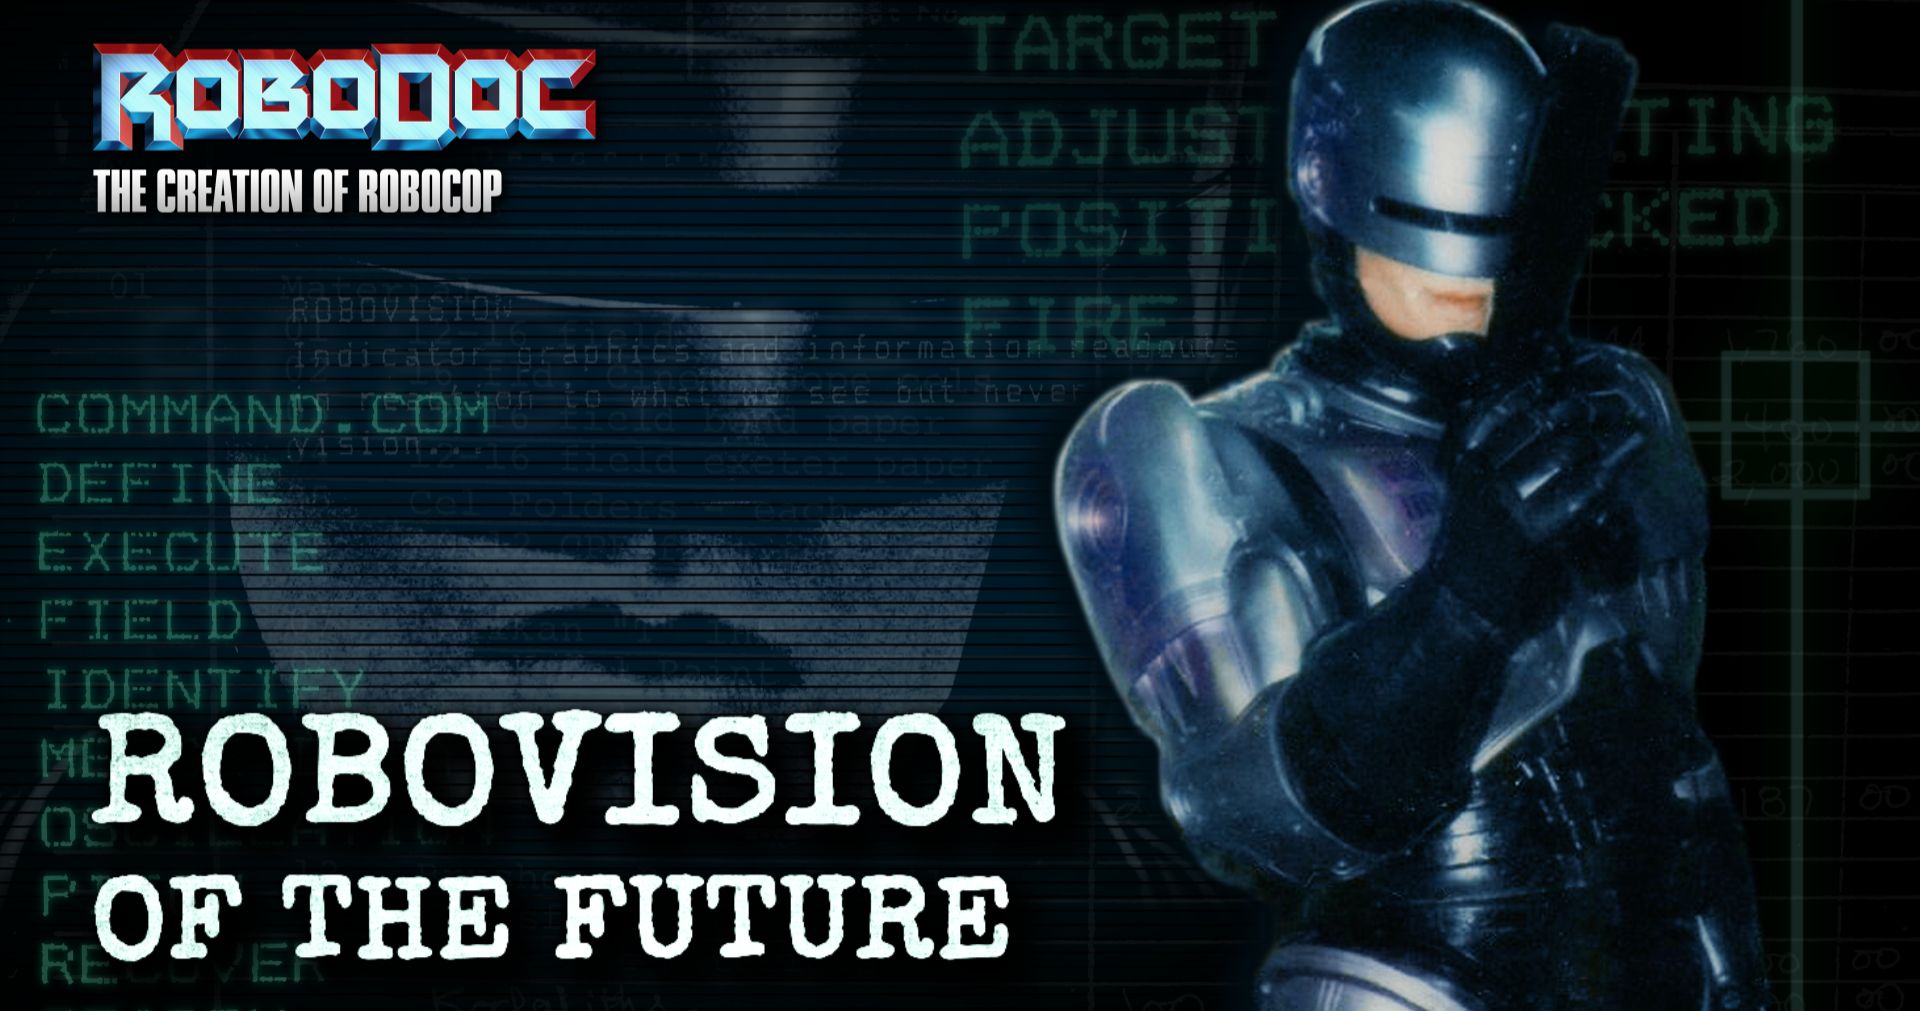 RoboDoc: The Creation of RoboCop Major Firepower - Exploring a Franchise [Exclusive Preview]